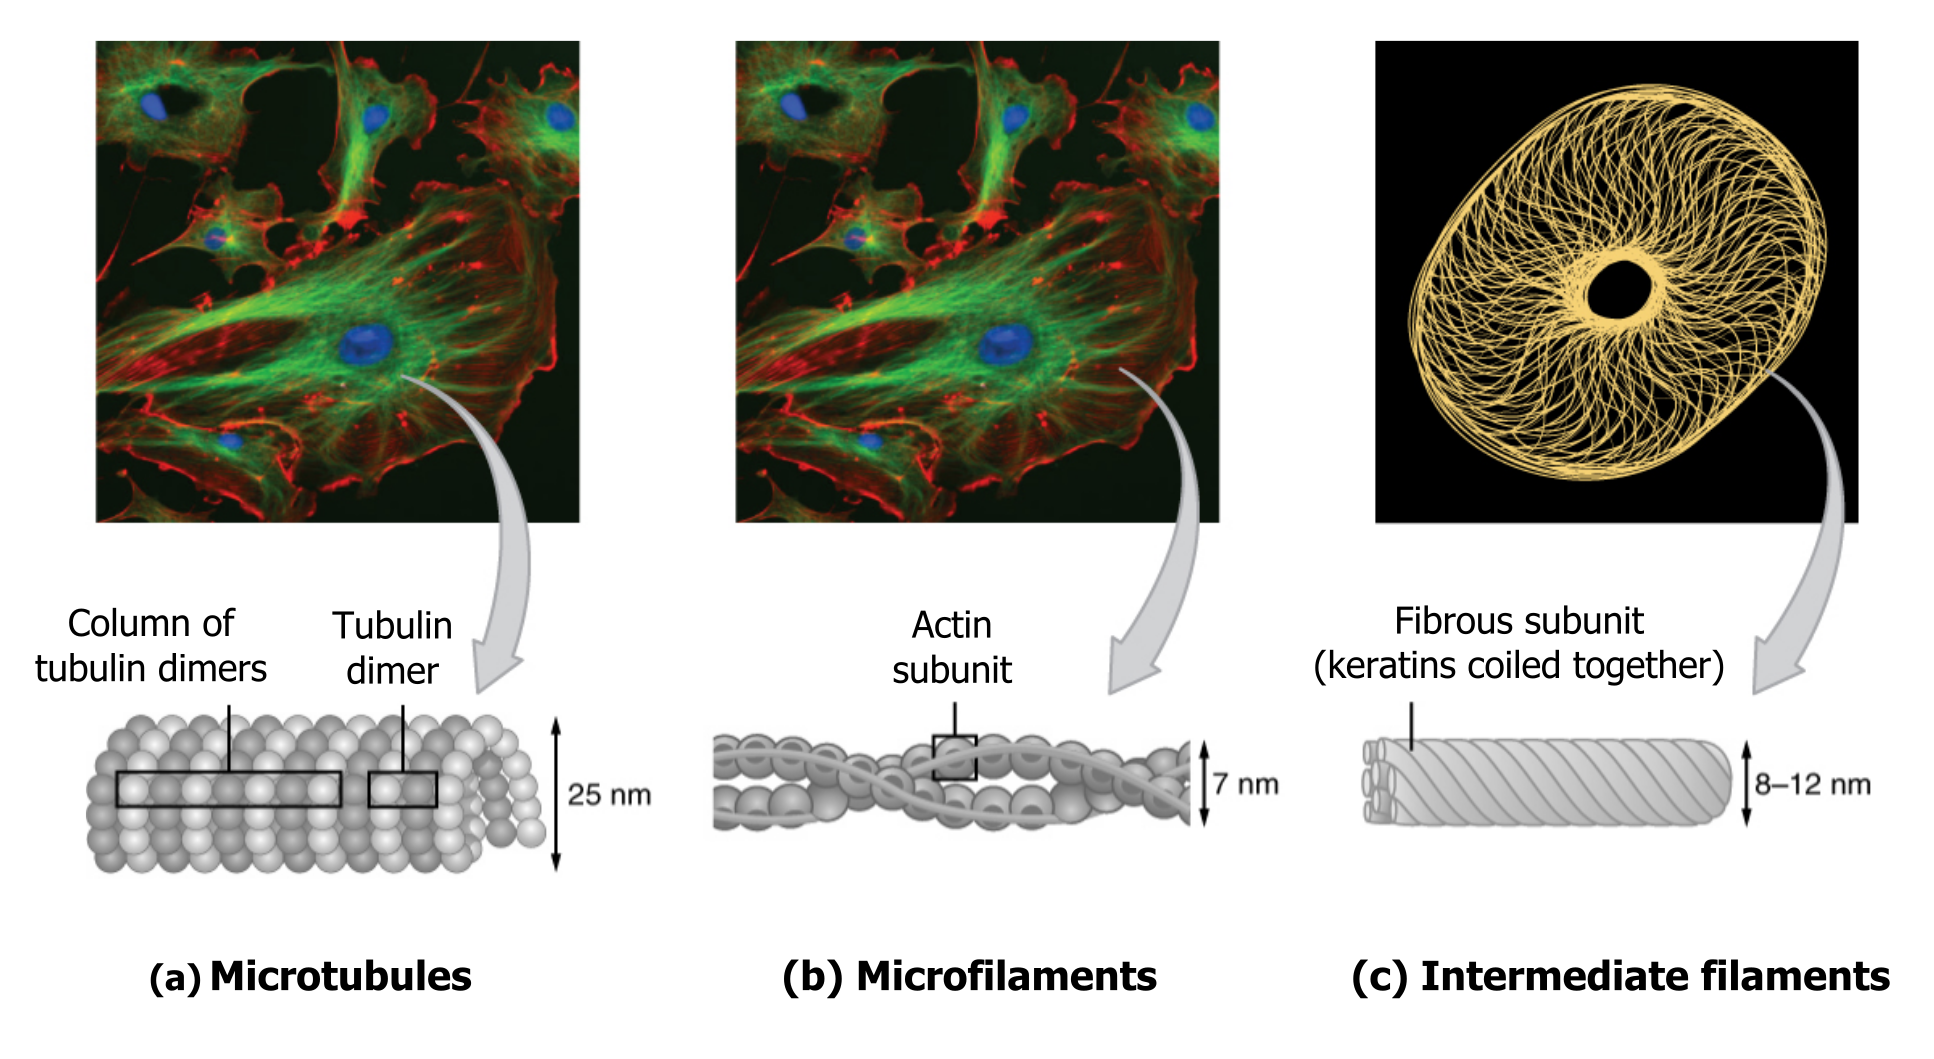 (a) Microtubules: Hollow cylindrical shape composed of many small spheres. Measures 25 nm tall. (b) Microfilaments: 2 strands of actin subunits, denoted by small spheres, twisted into a helix shape. Measures 7 nm tall. (c) Intermediate filaments: Fibrous subunit of keratins coiled together. Measures 8-12 nm tall.